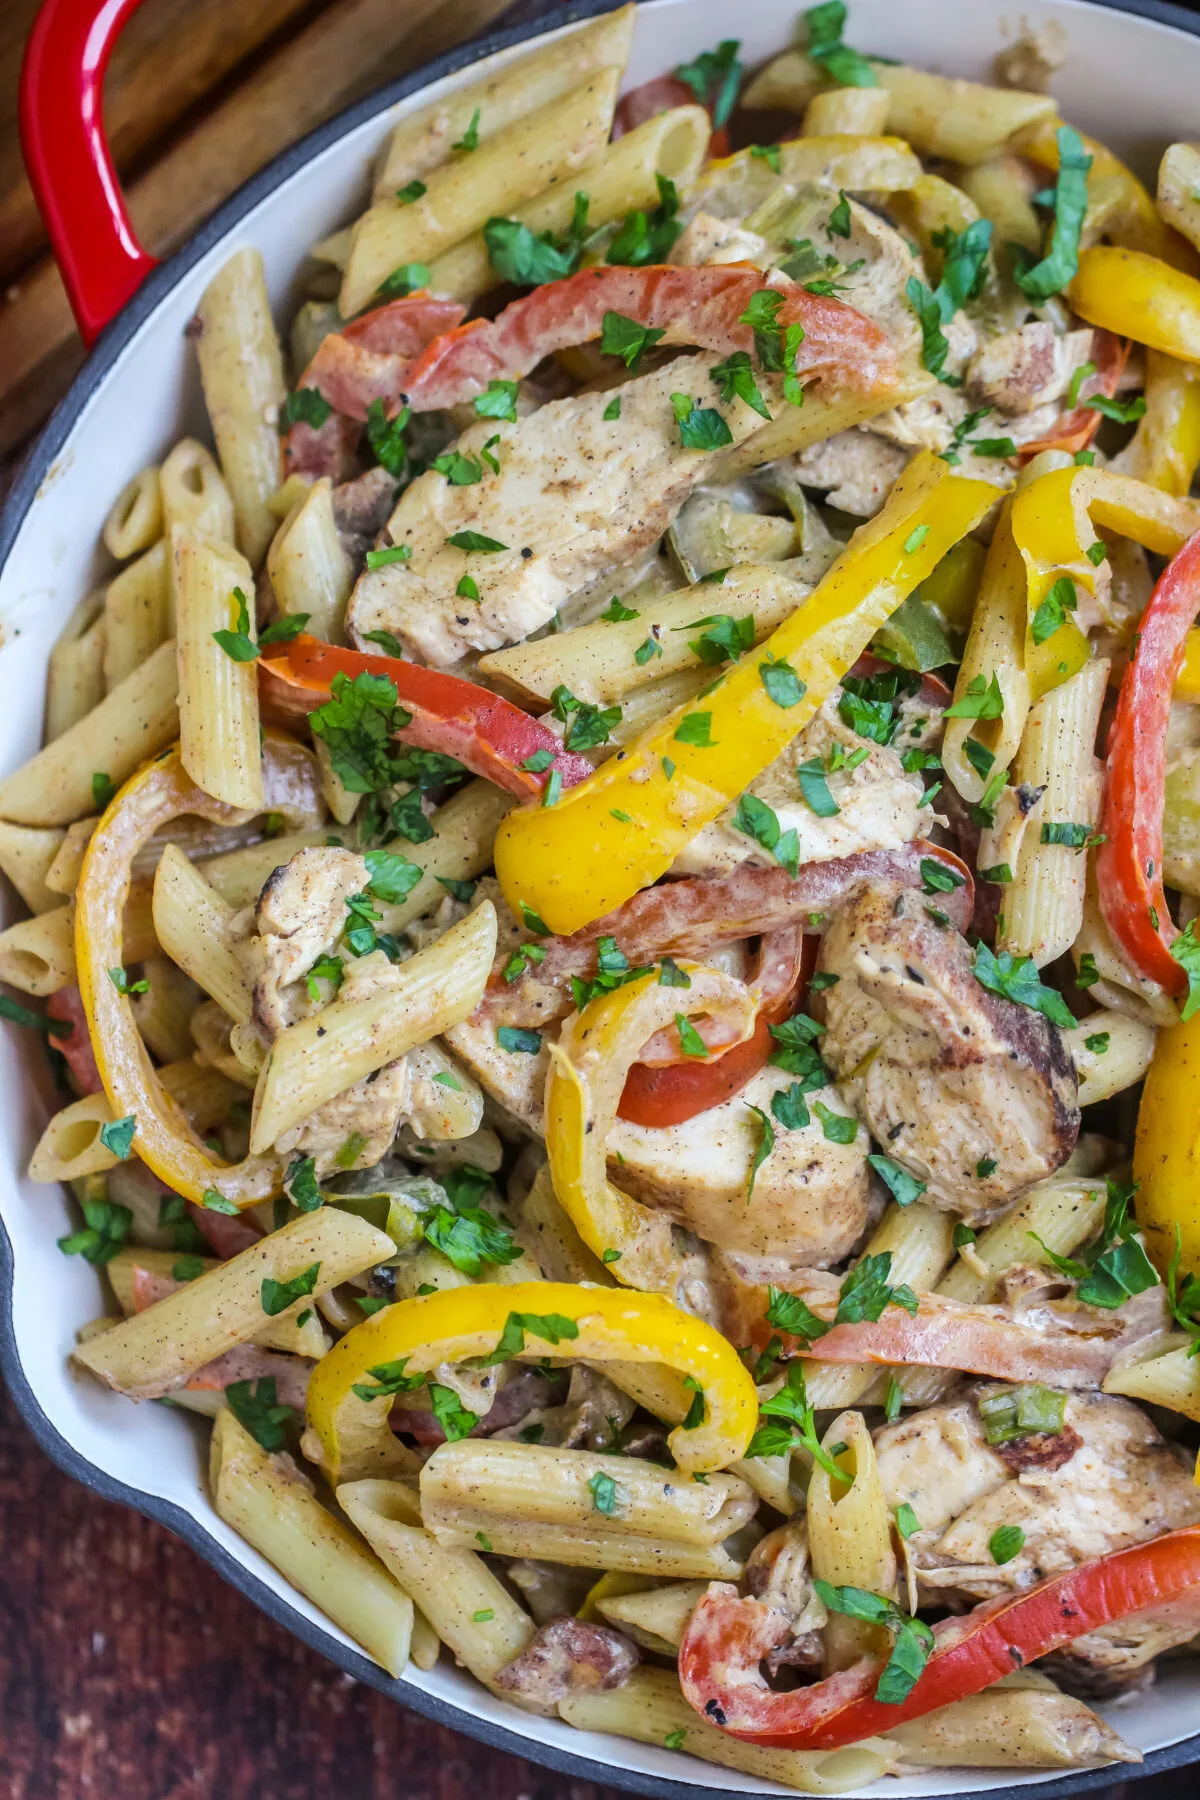 This Jamaican jerk chicken pasta will have your family licking their plates, this Rasta Pasta Recipe is a Jamaican-inspired meal you'll love!